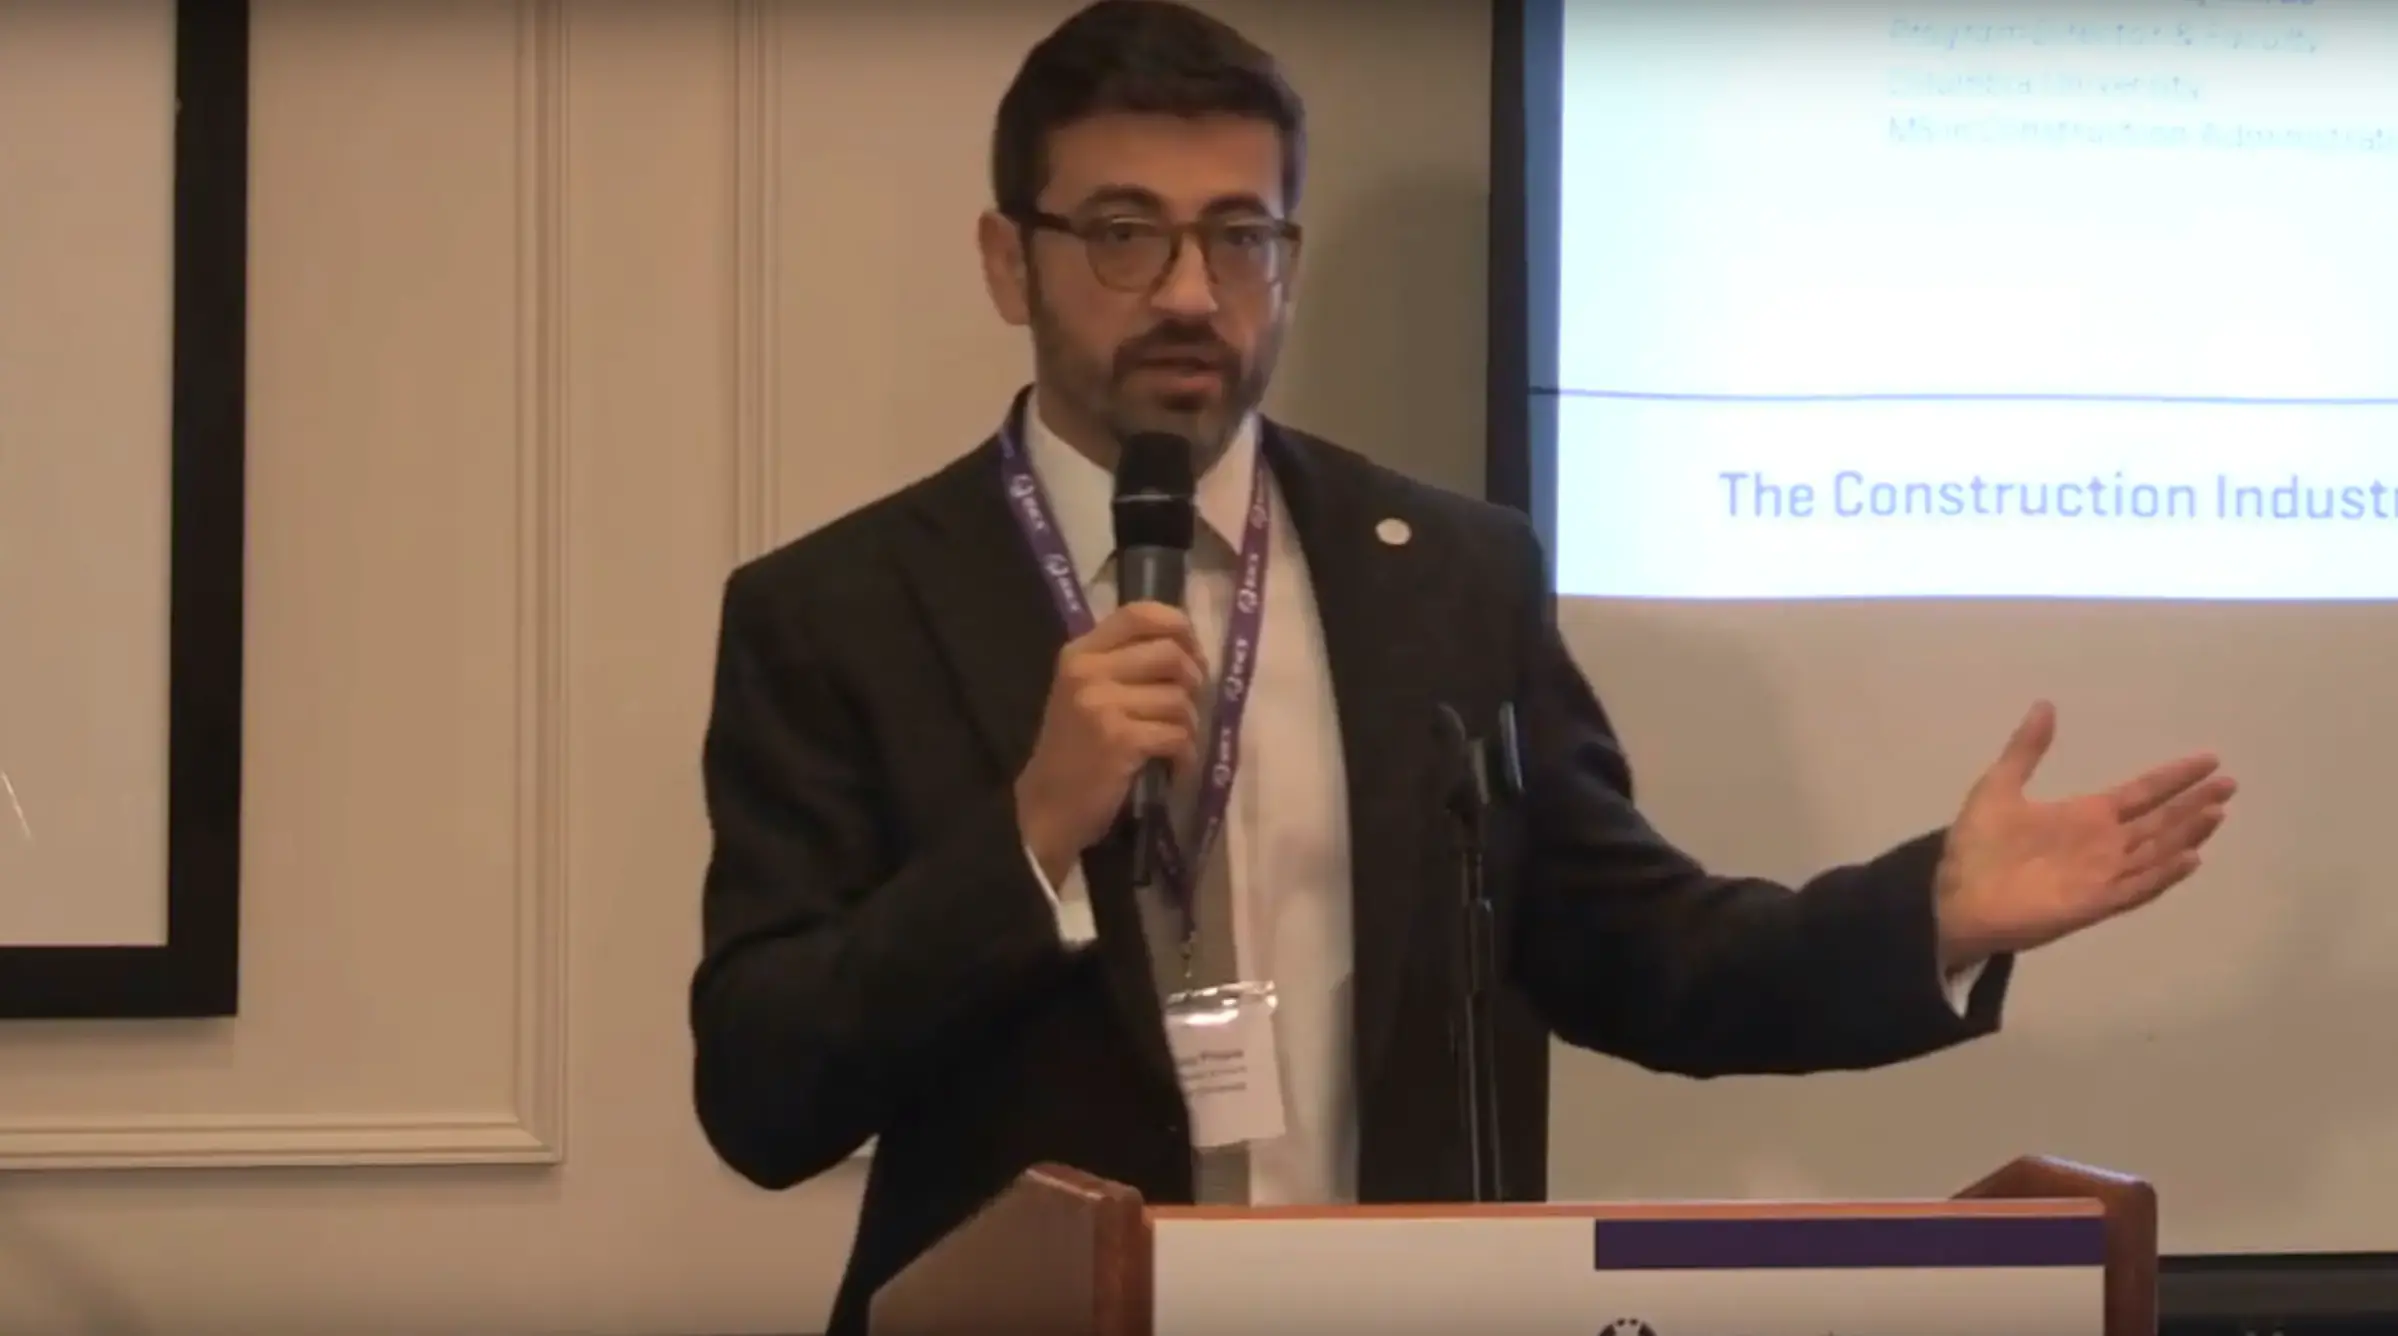 Watch video highlights from the 2019 Columbia and RICS Construction Technology Symposium.